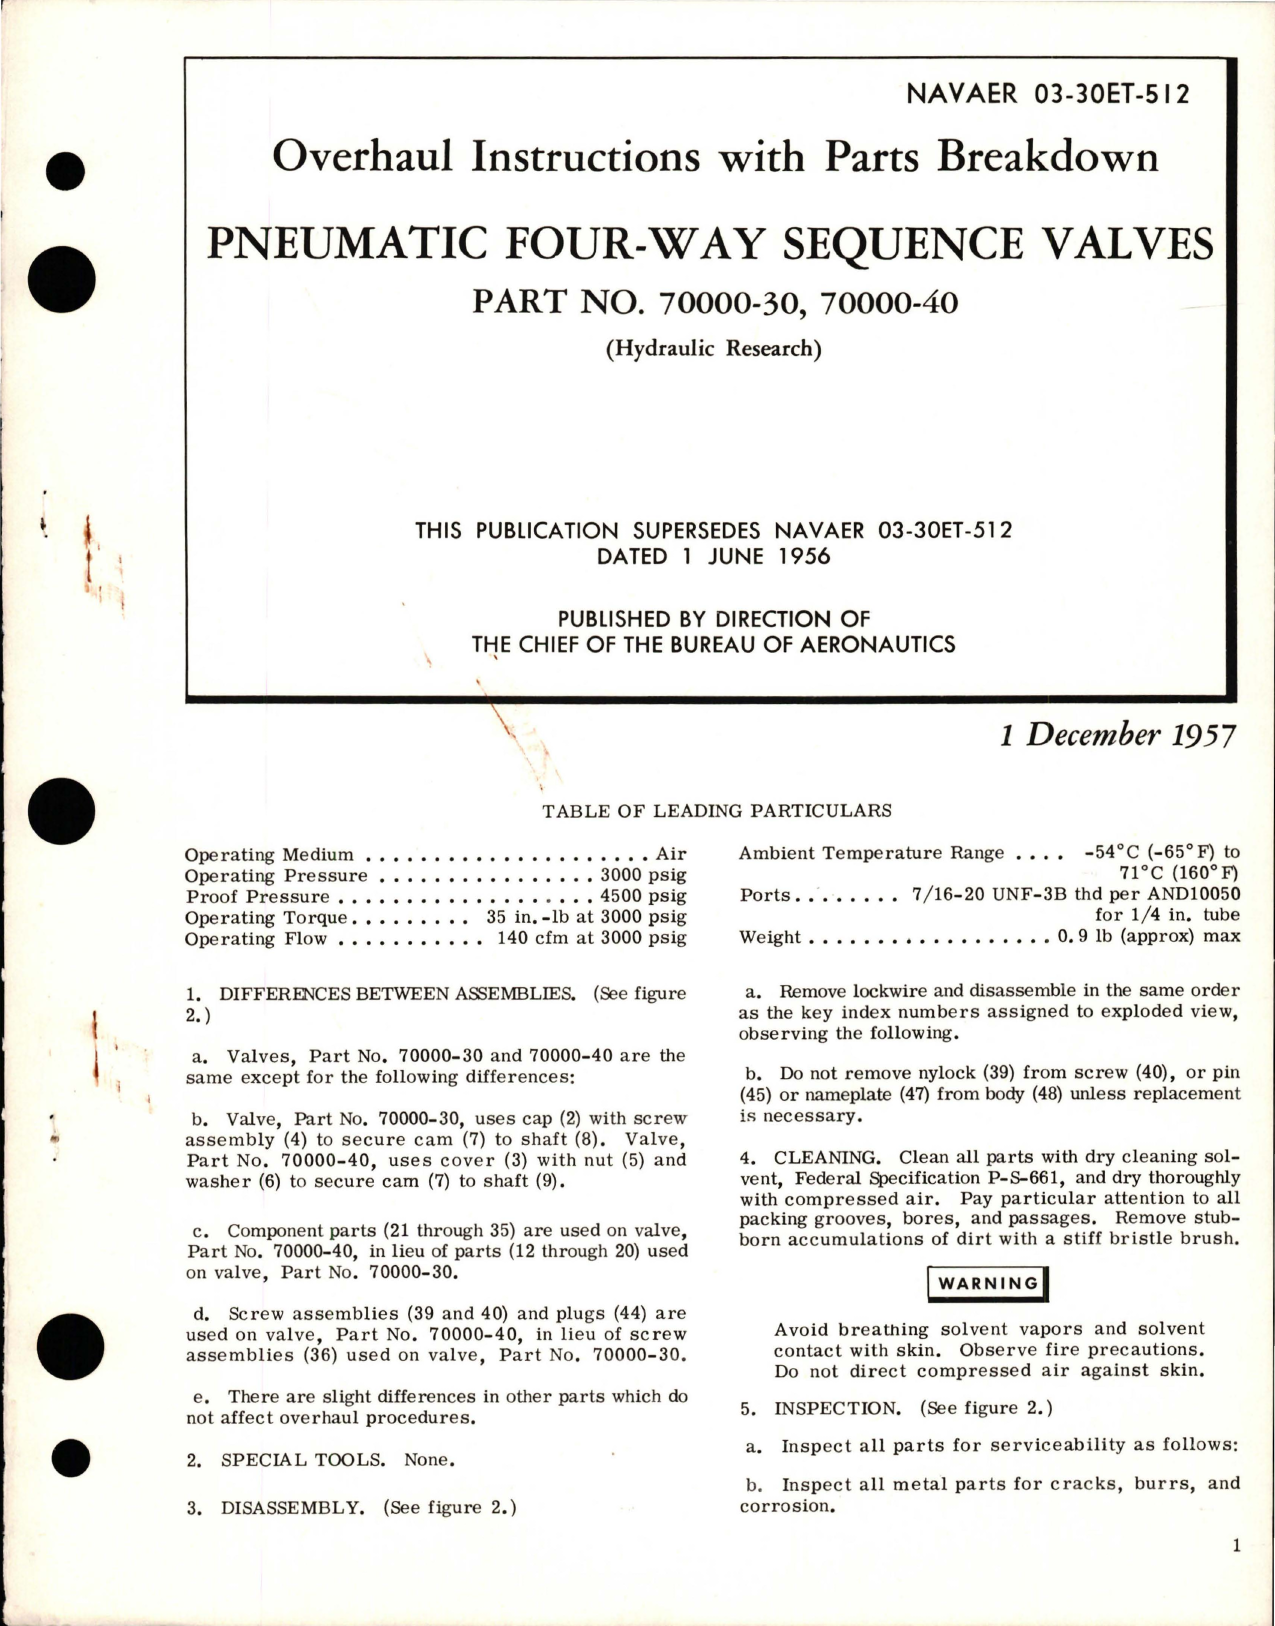 Sample page 1 from AirCorps Library document: Overhaul Instructions with Parts Breakdown for Pneumatic Four-Way Sequence Valves - Parts 70000-30 and 70000-40